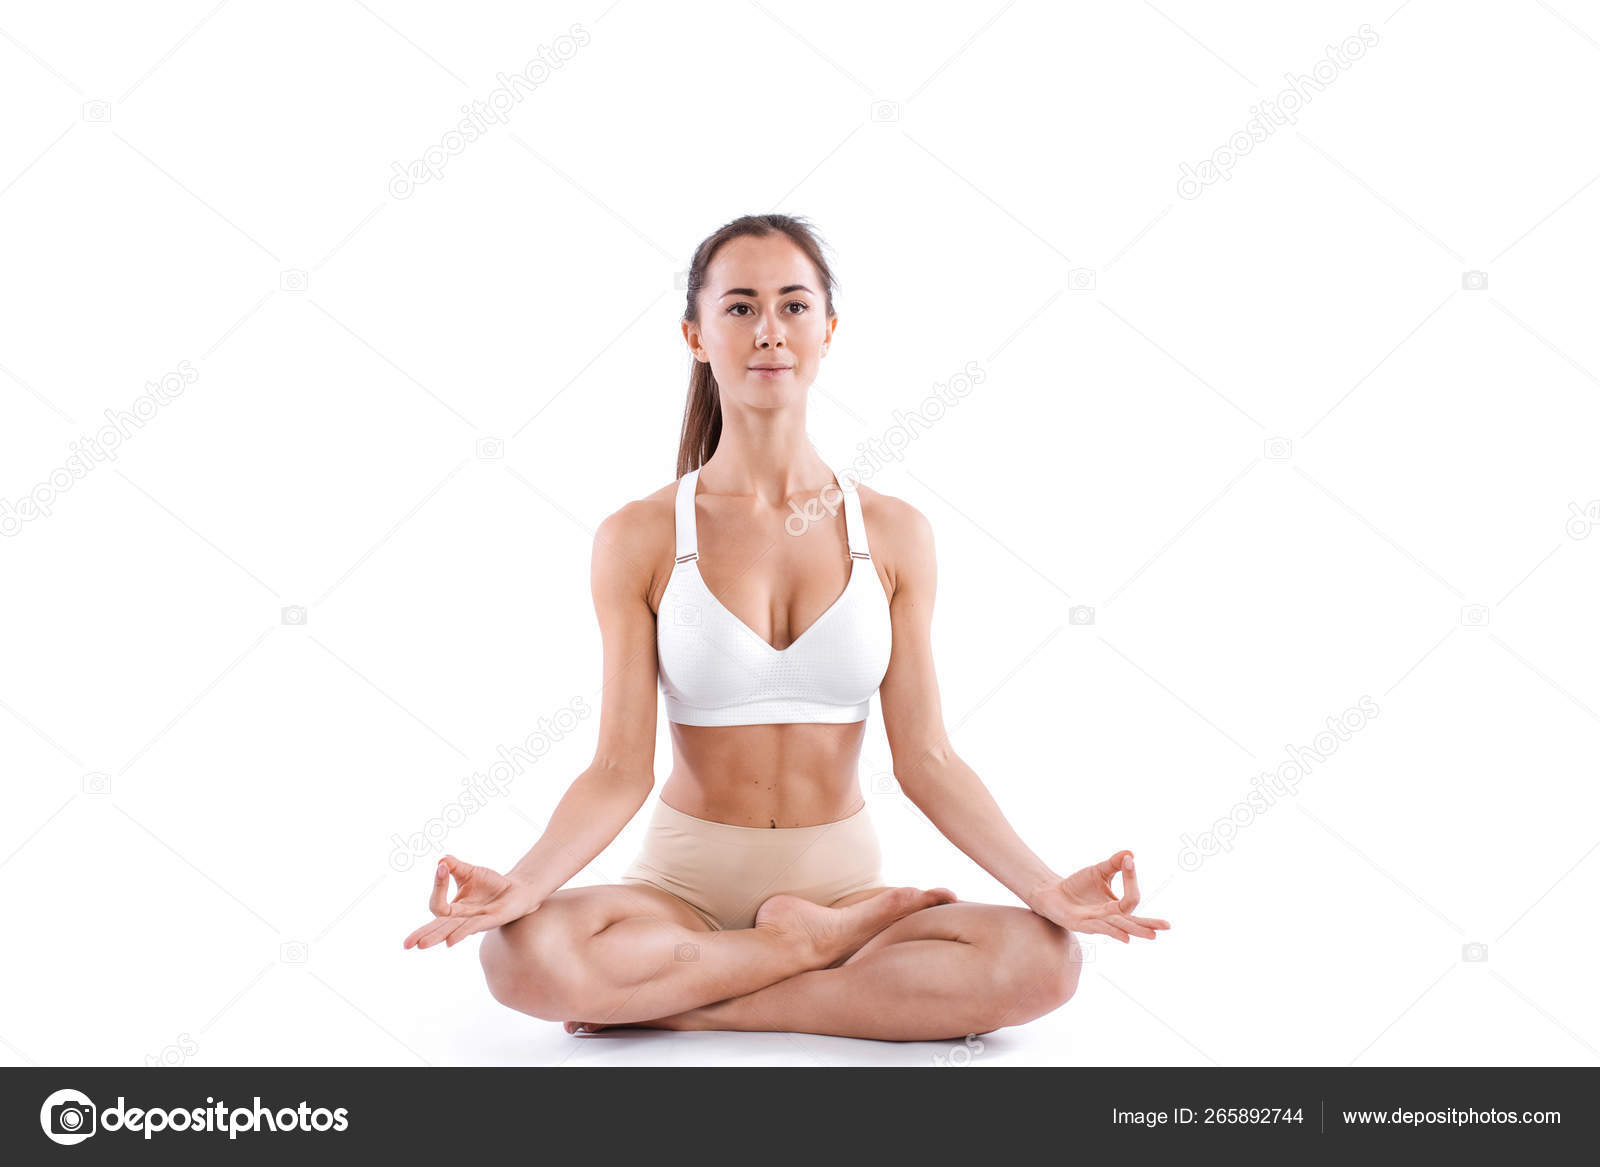 Beautiful woman with perfect body practicing Yoga poses full